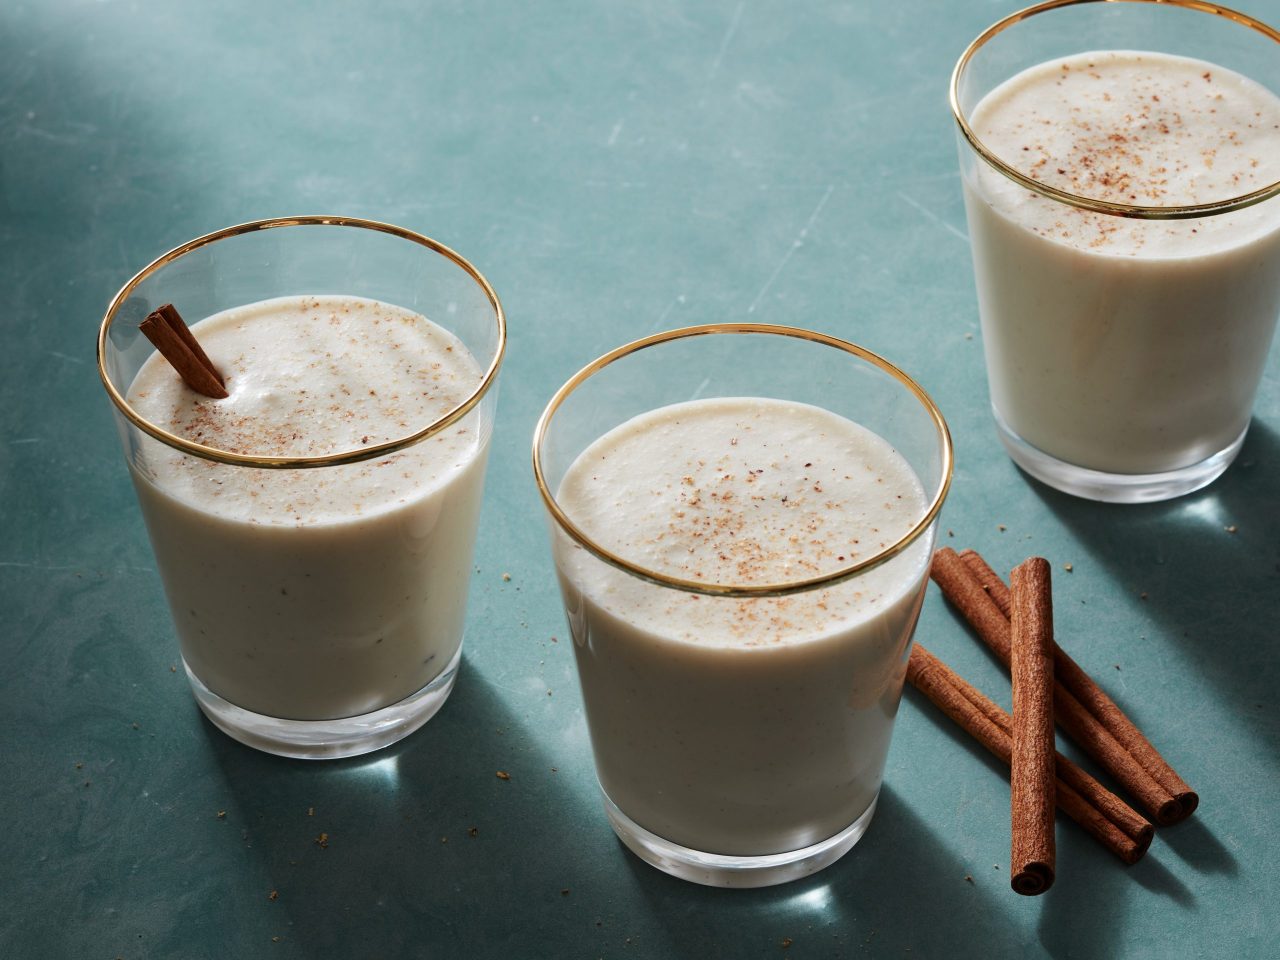 Food Network Kitchen's Coquito